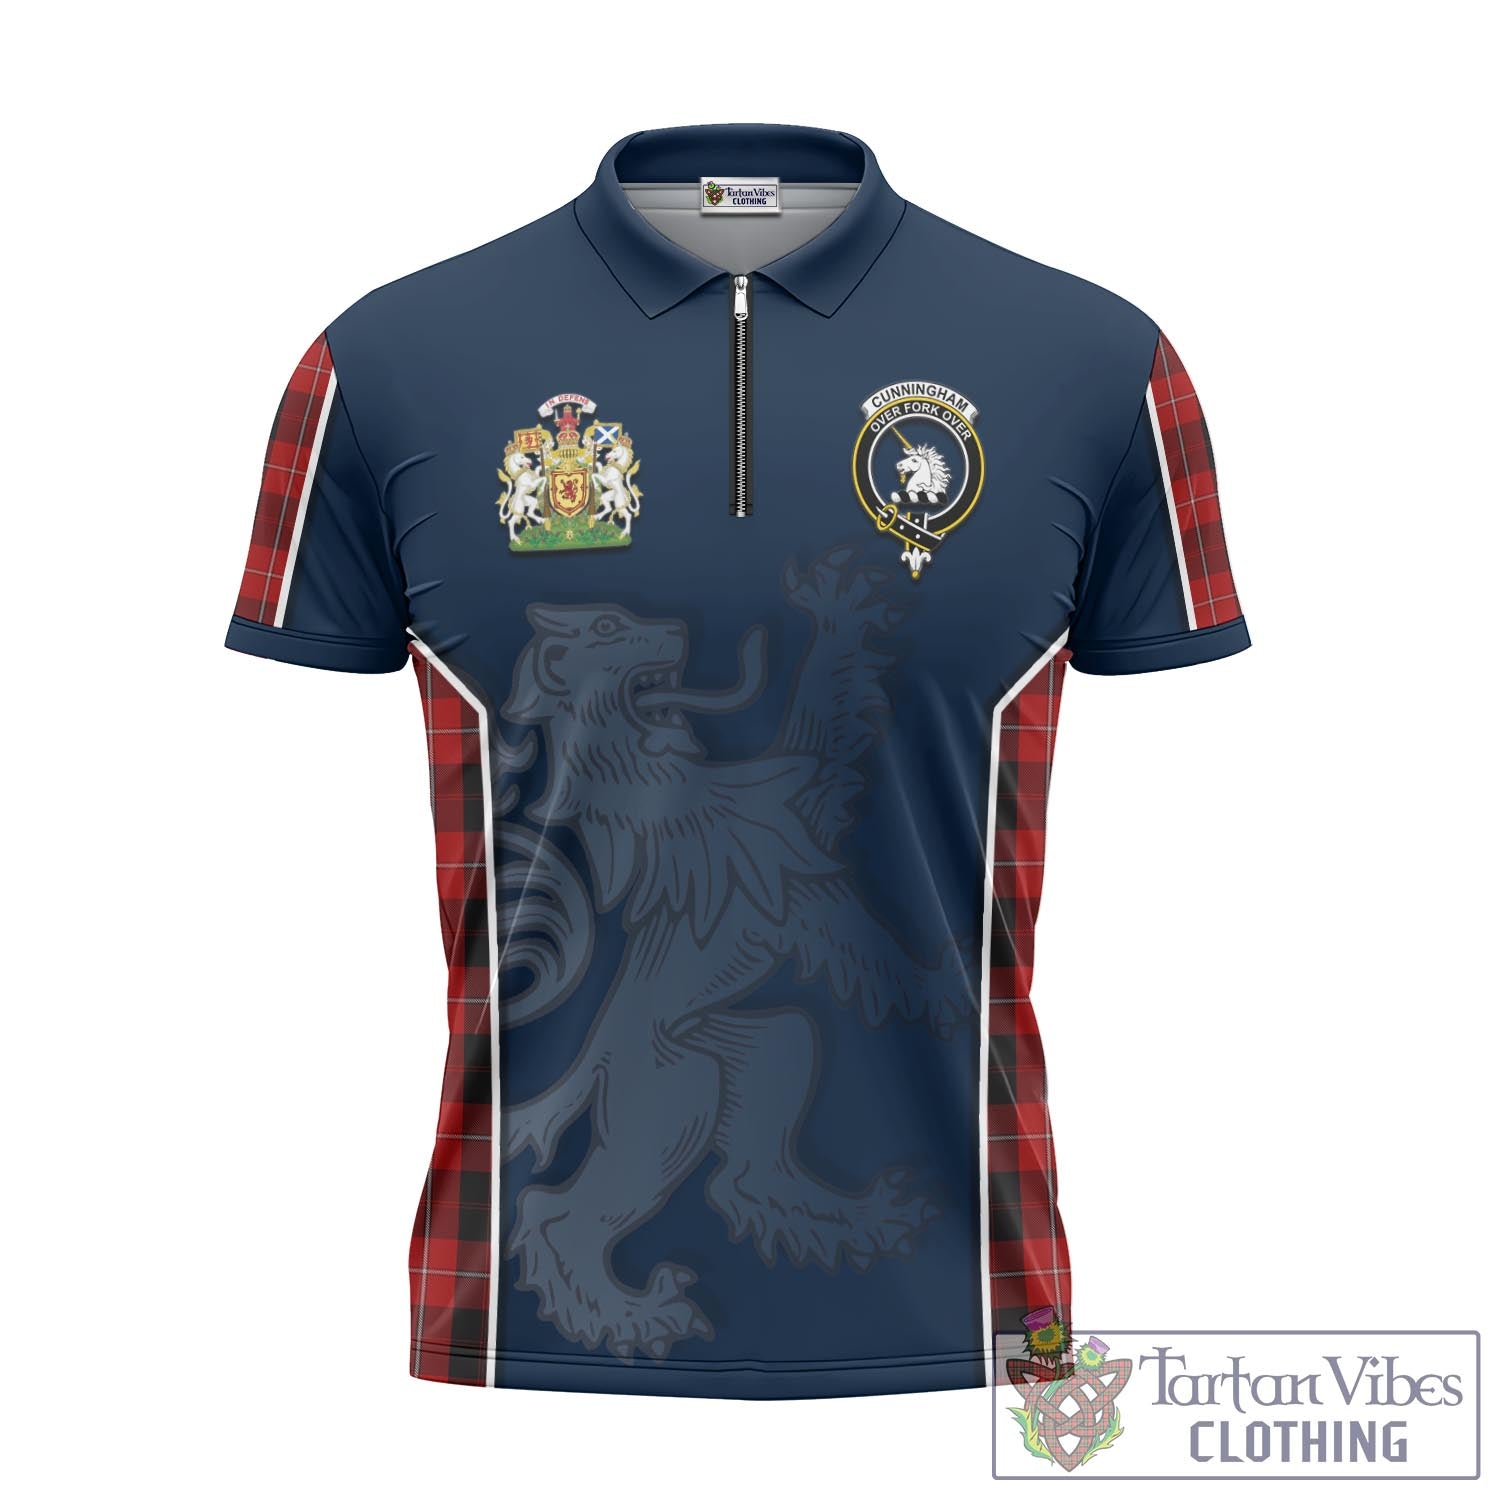 Tartan Vibes Clothing Cunningham Tartan Zipper Polo Shirt with Family Crest and Lion Rampant Vibes Sport Style